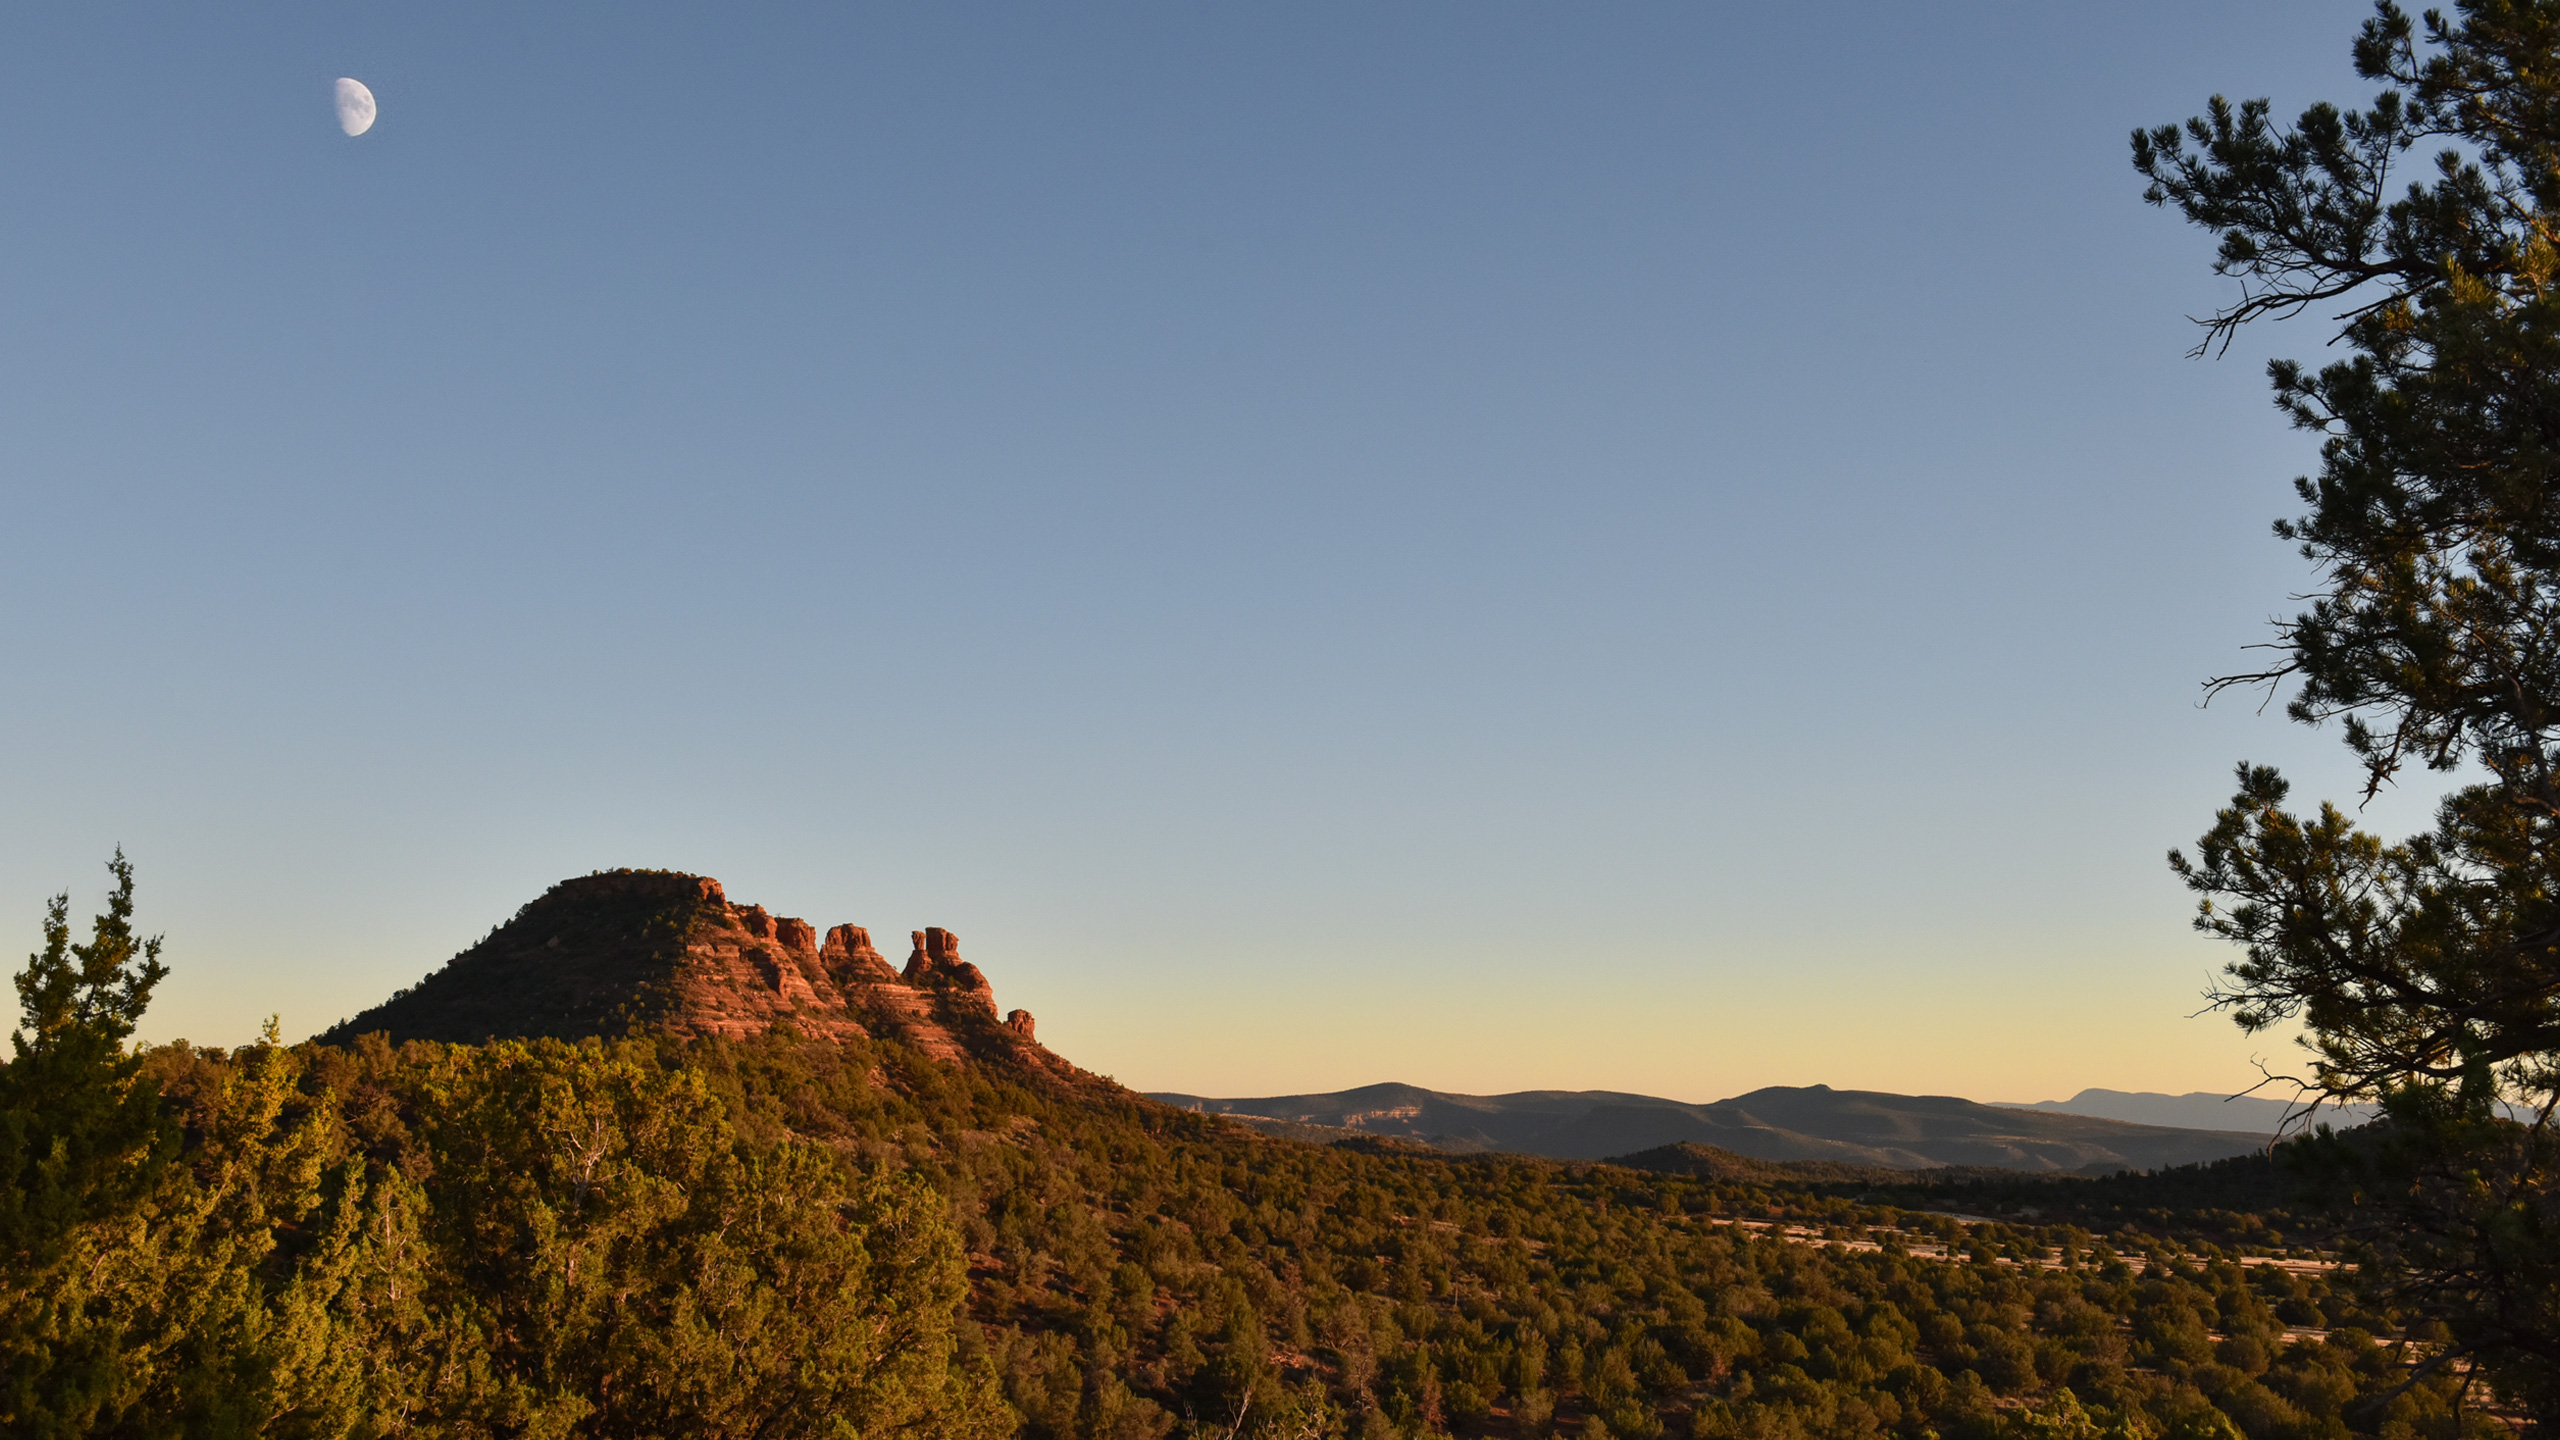 moonrise over the red rocks in Sedona at dusk